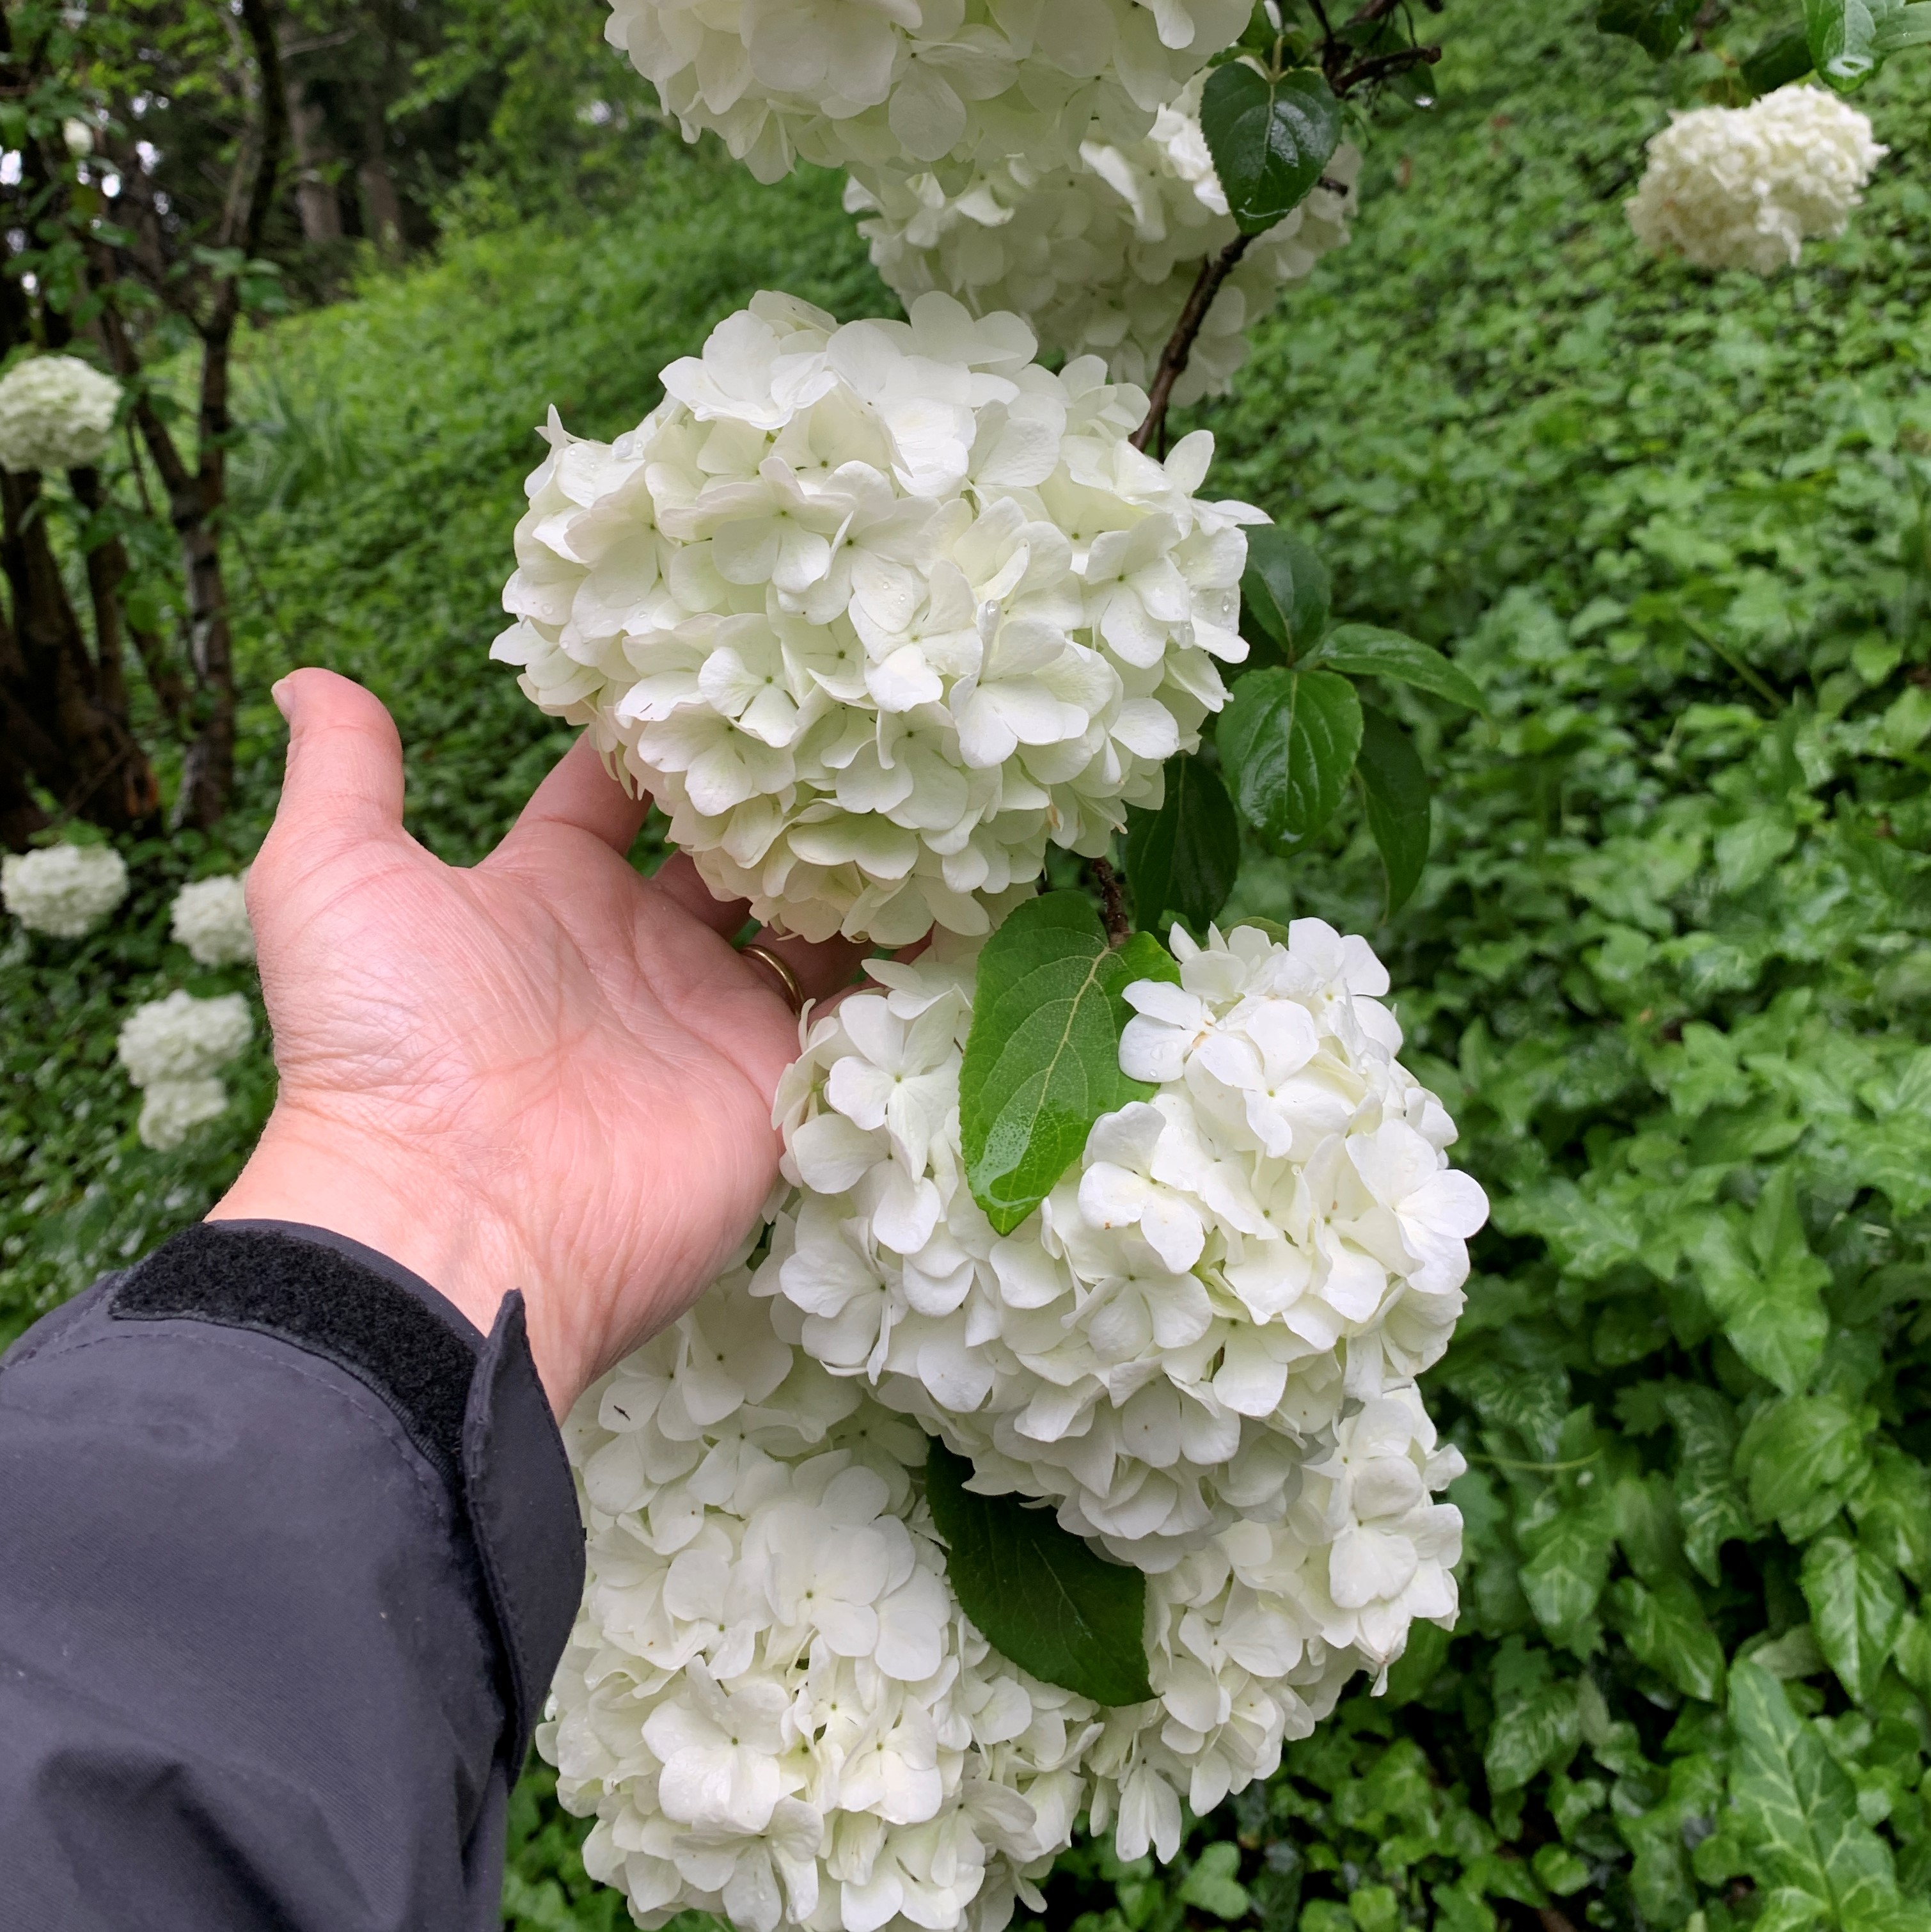 Flowers of snowball viburnum with a woman's hand holding one of them to show the scale.